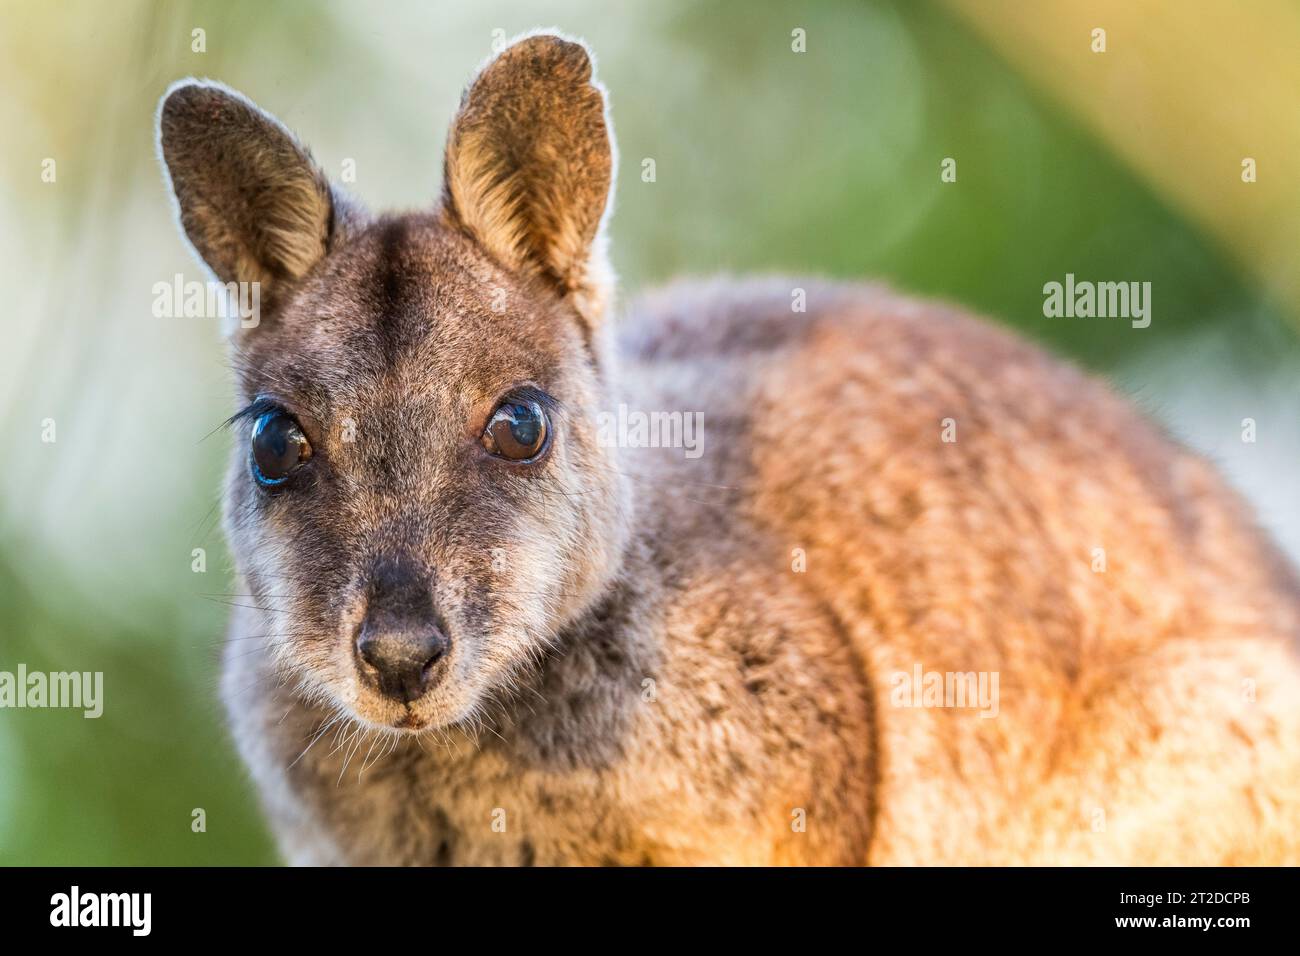 The allied rock-wallaby or Weasel rock-wallaby (Petrogale assimilis) is a species of rock-wallaby found in northeastern Queensland, Australia Stock Photo